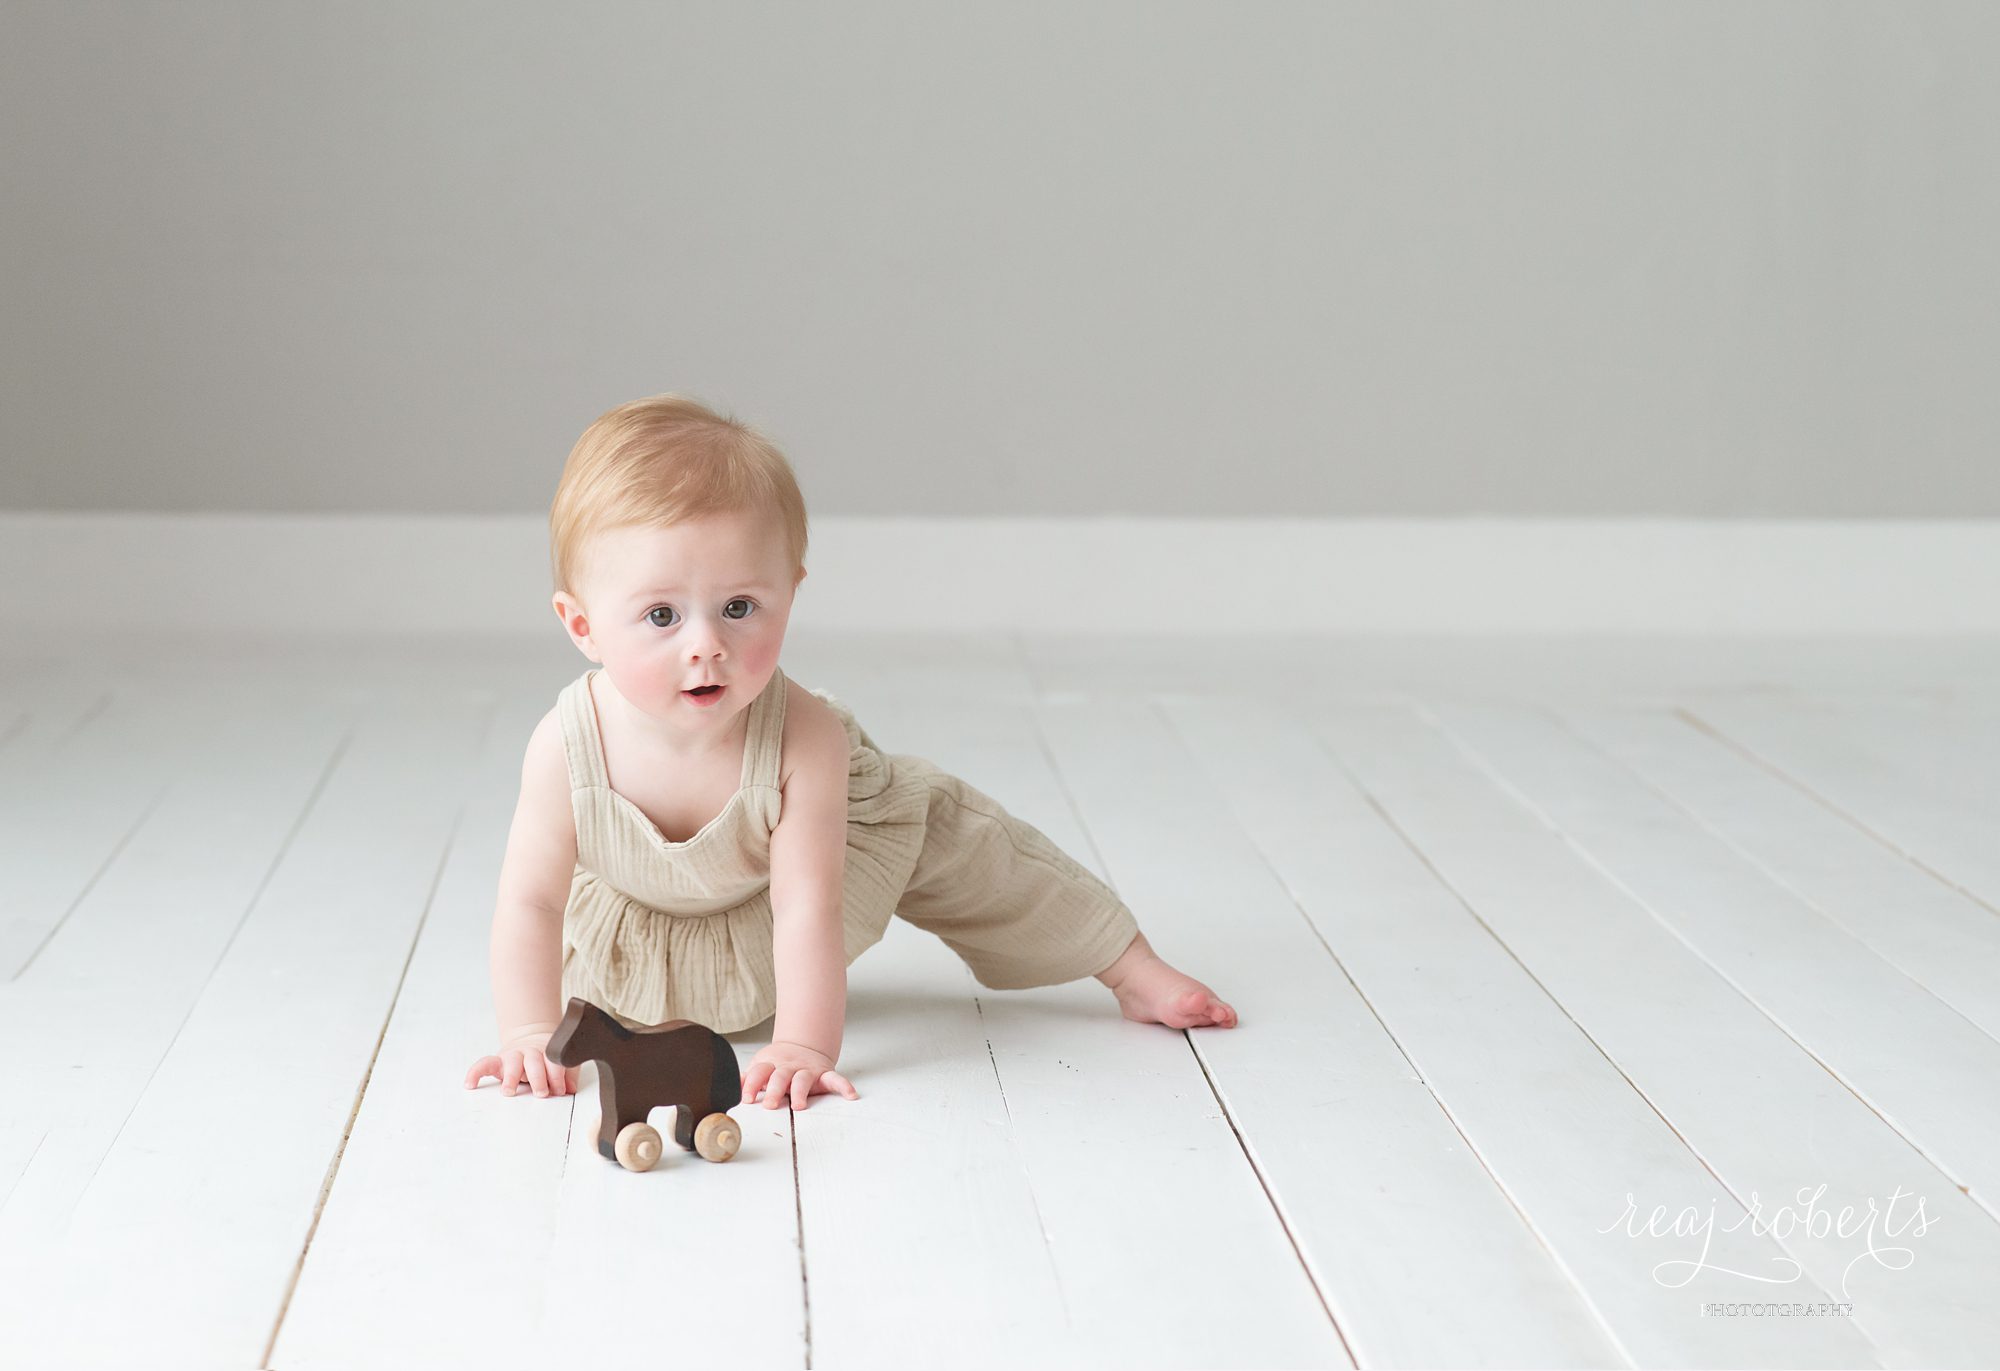 Chandler baby milestone photographer 6 month photo session girl with wooden horse & linen romper | Chandler Family Photographer | Reaj Roberts Photography